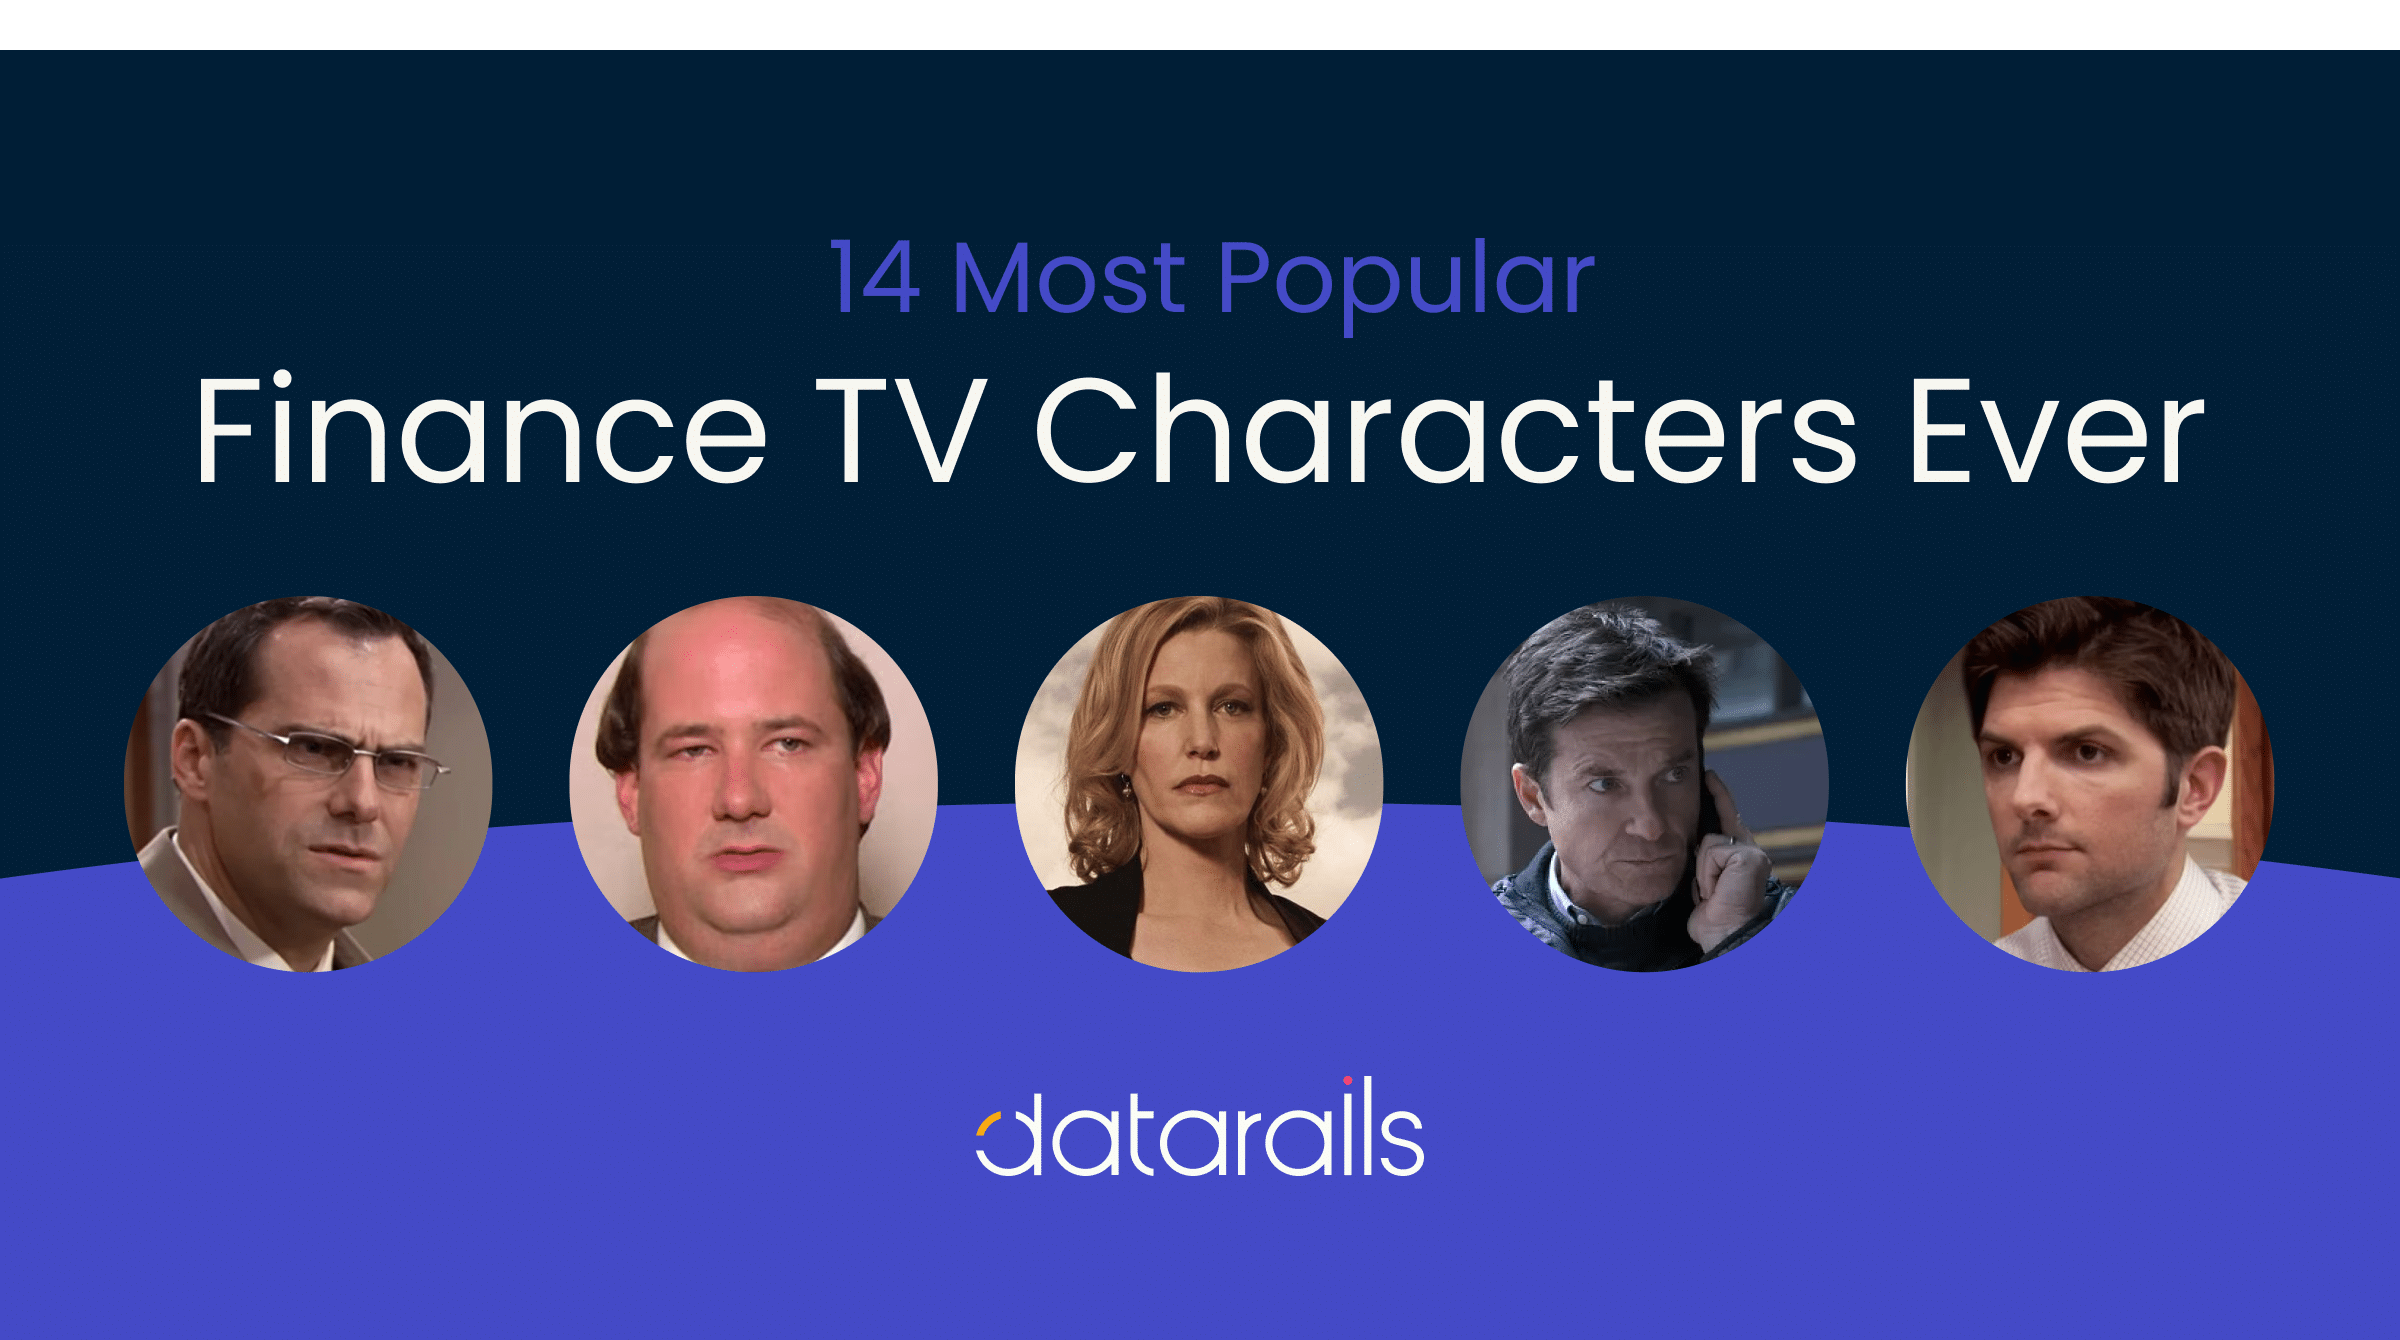 Ranking the 14 Most Popular Finance TV Characters